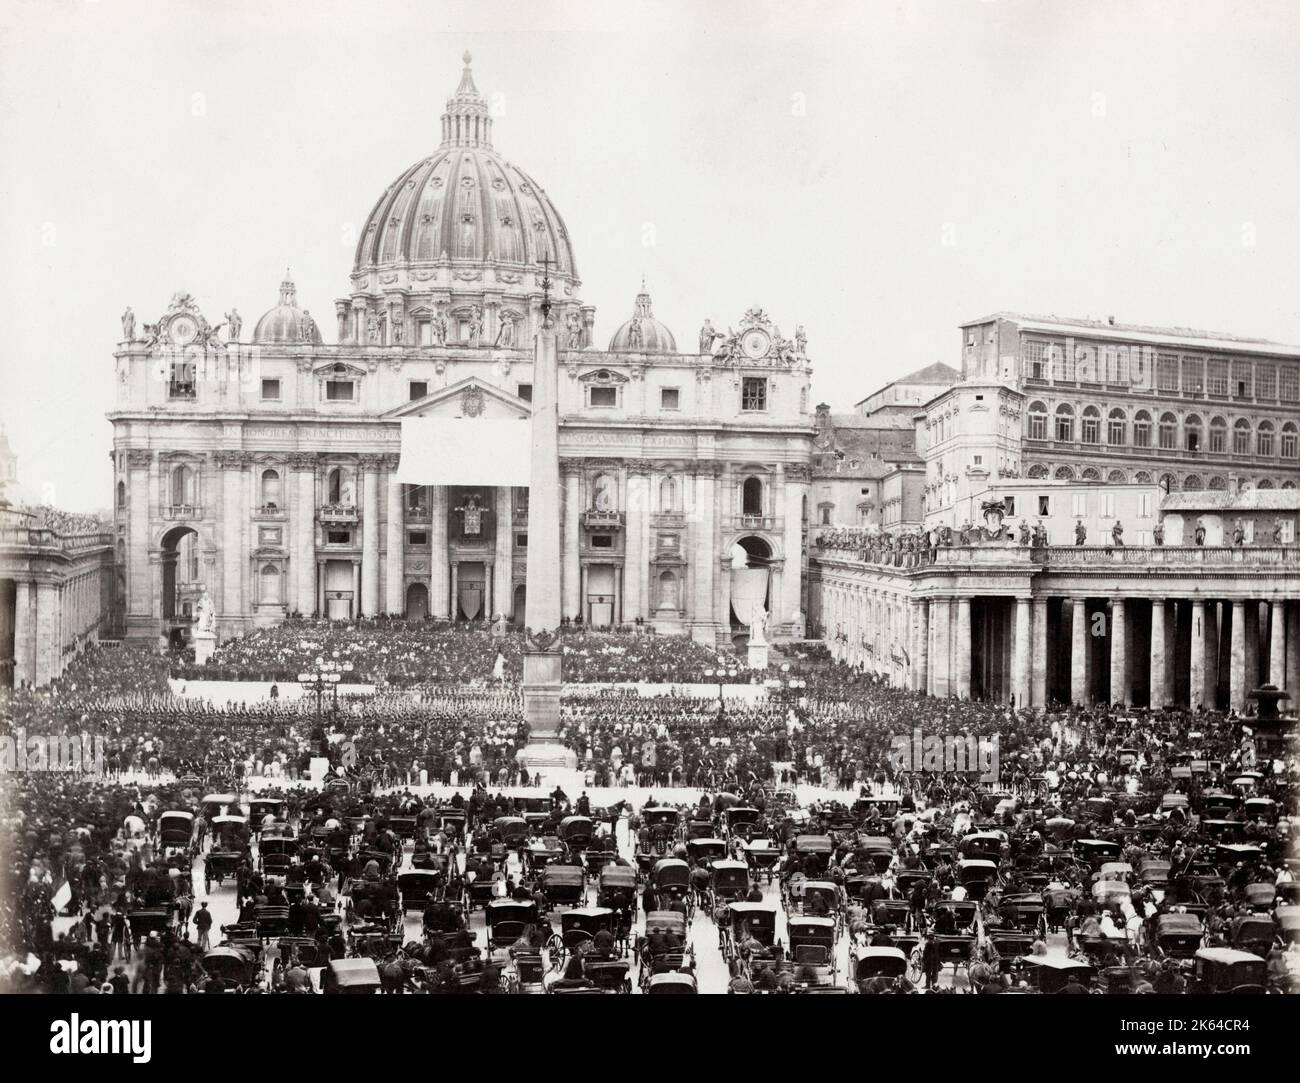 Vintage 19th century photograph - large crowd in St. Peter's Square for a blessing by the Pope from the Vatican. Most liklely Leo XIII. Stock Photo